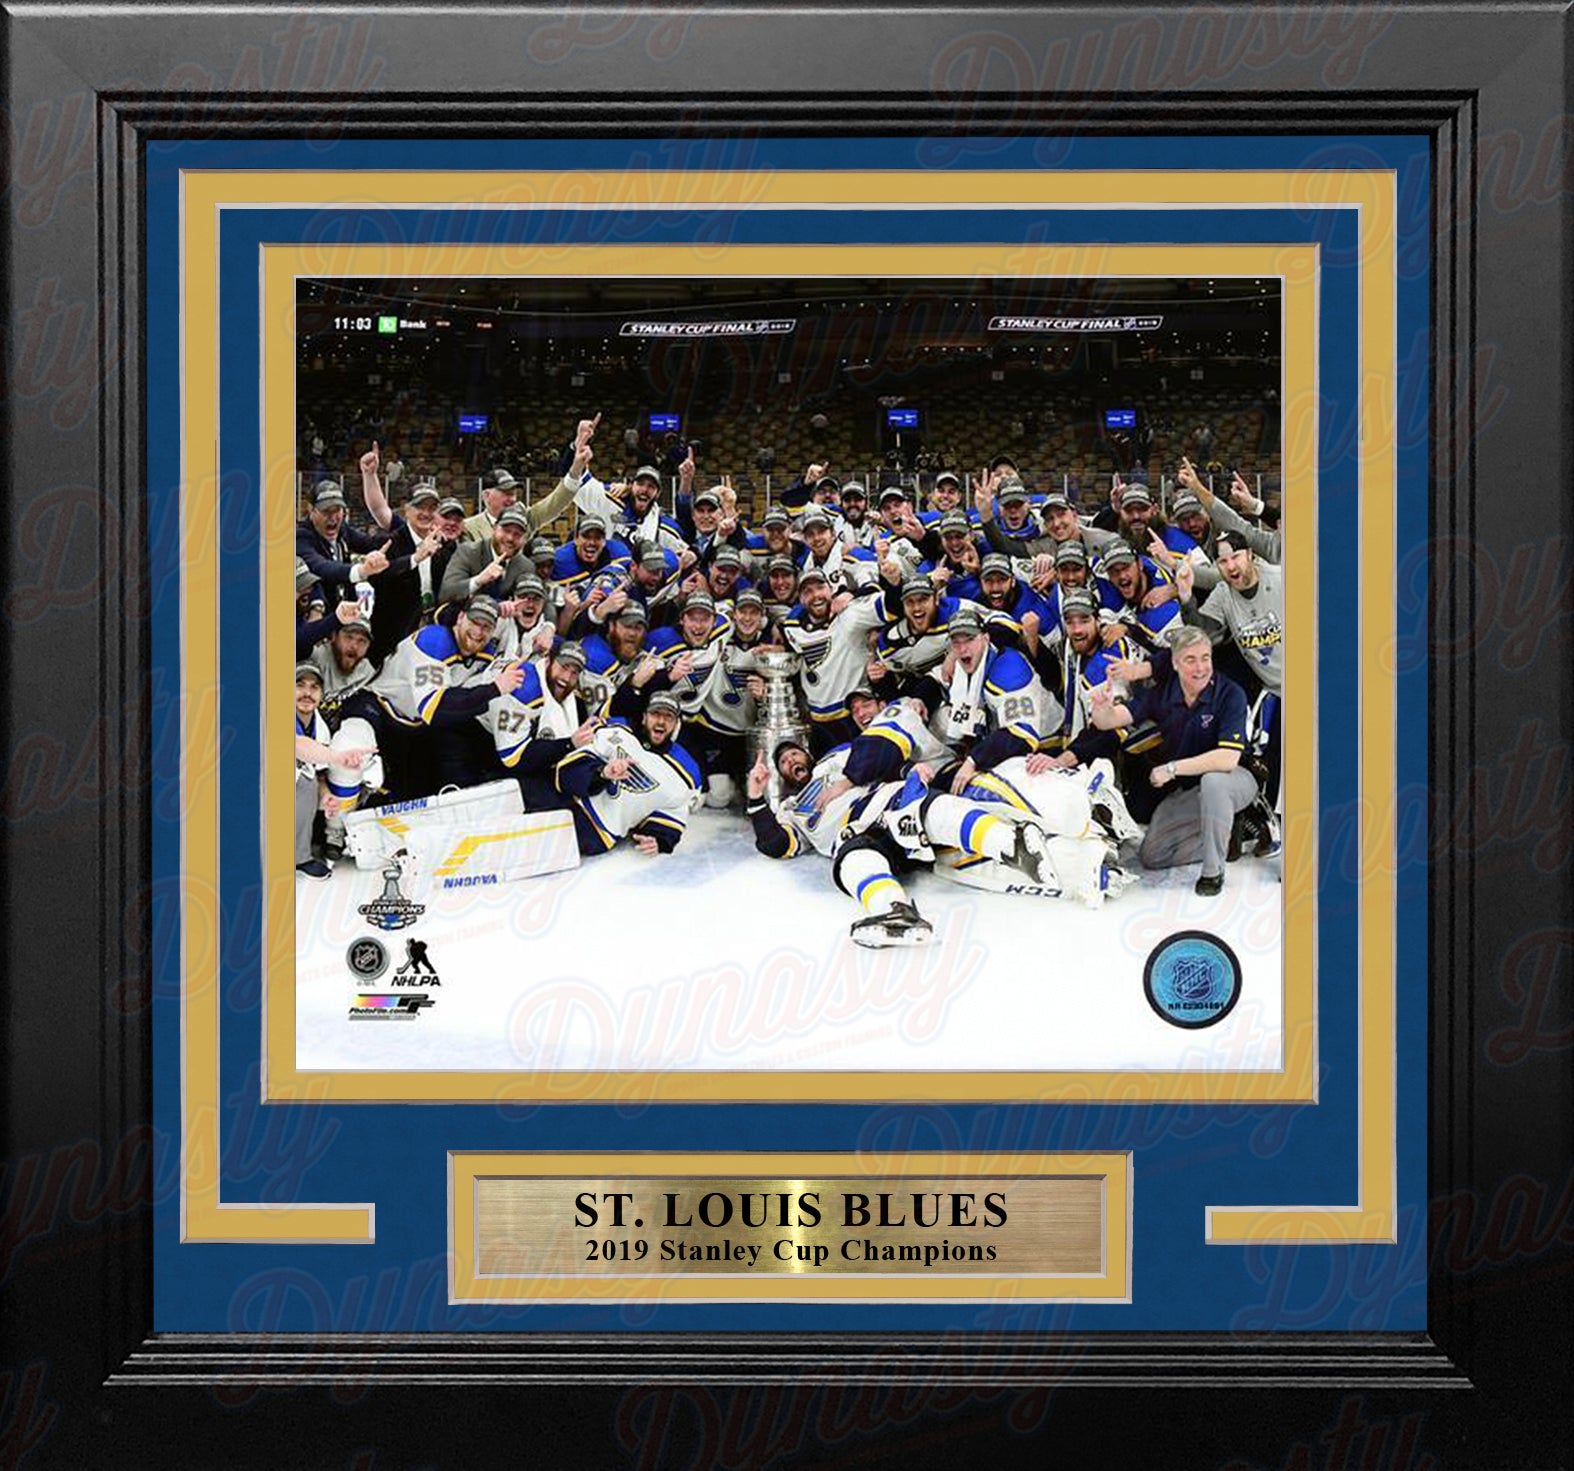 St. Louis Blues 2019 Stanley Cup Champions Team Celebration 8" x 10" Framed Hockey Photo - Dynasty Sports & Framing 